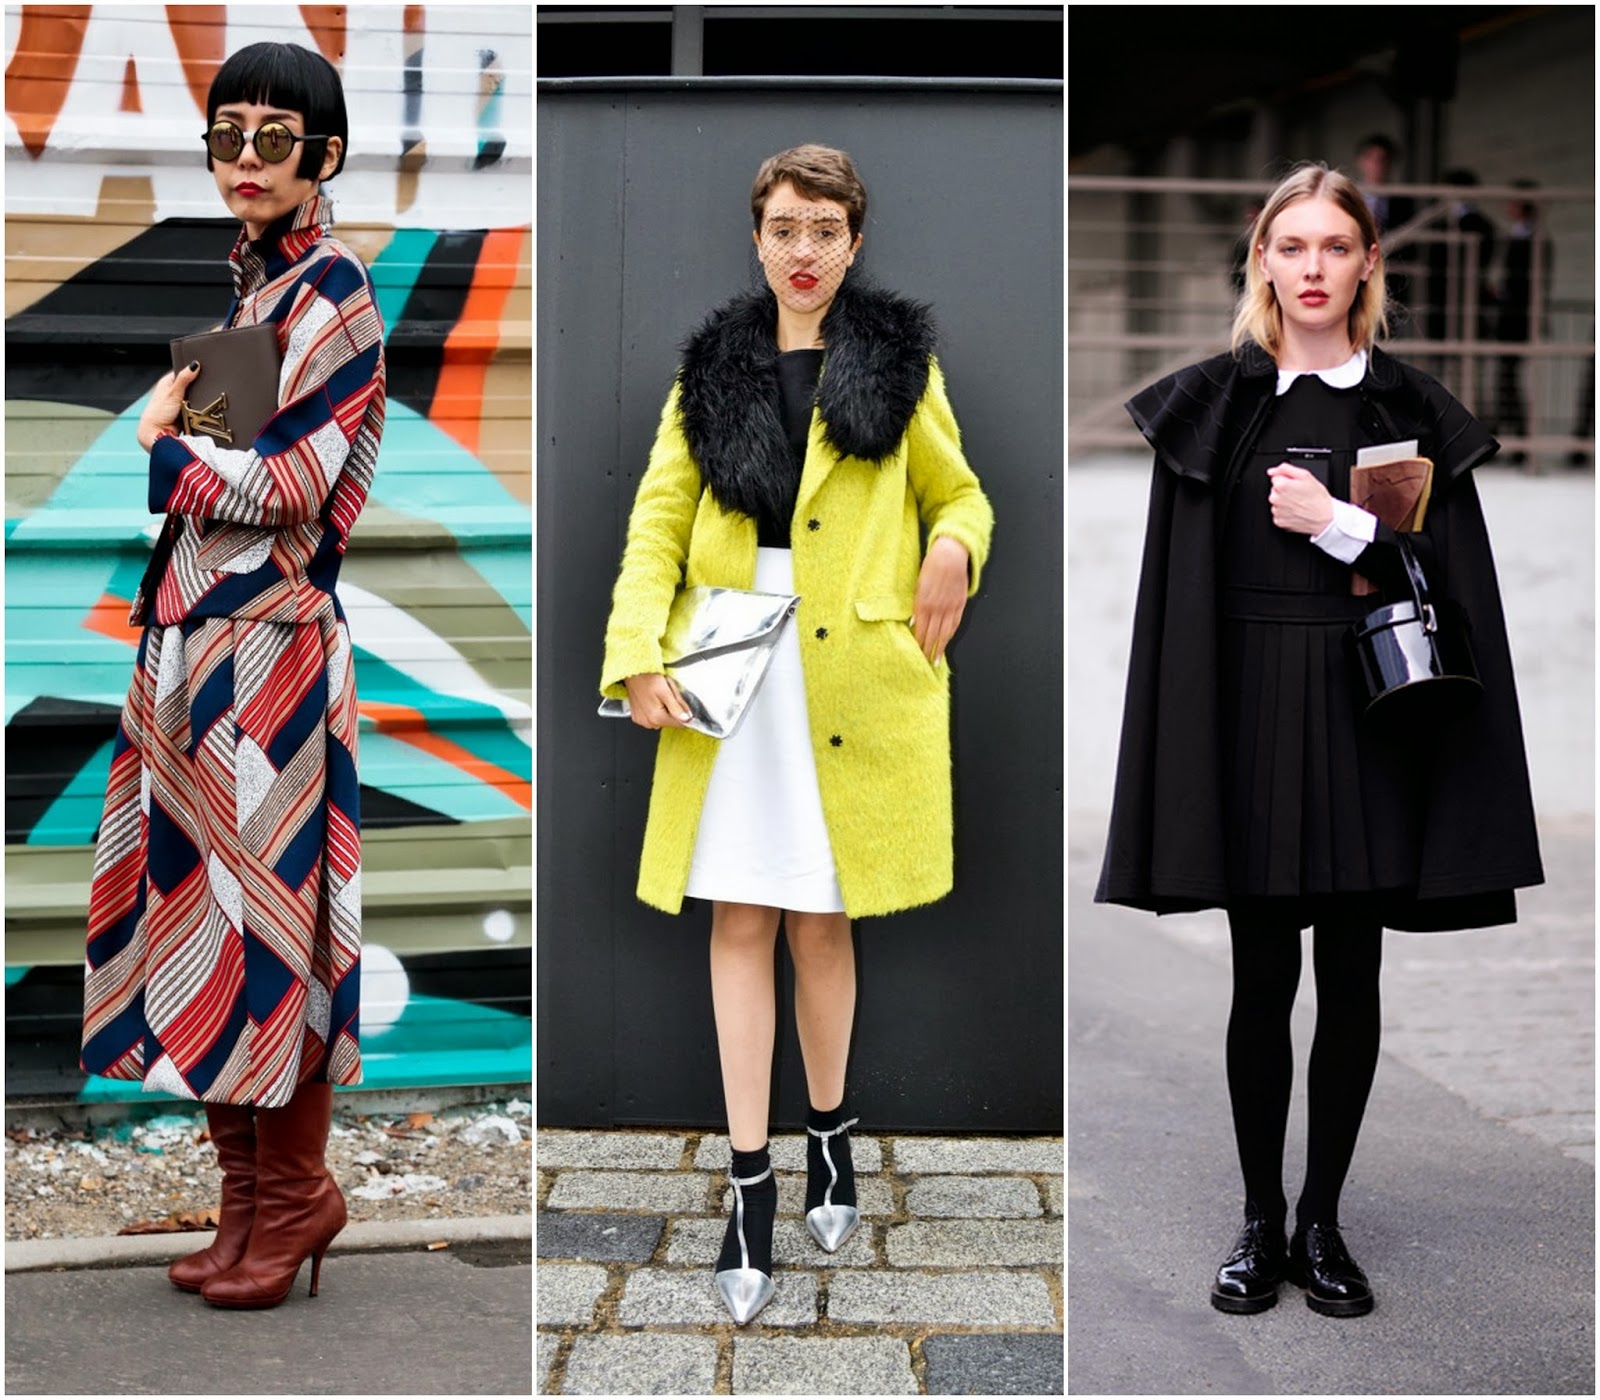 small earth vintage: street style: tartan, granny chic, and bundled up ...